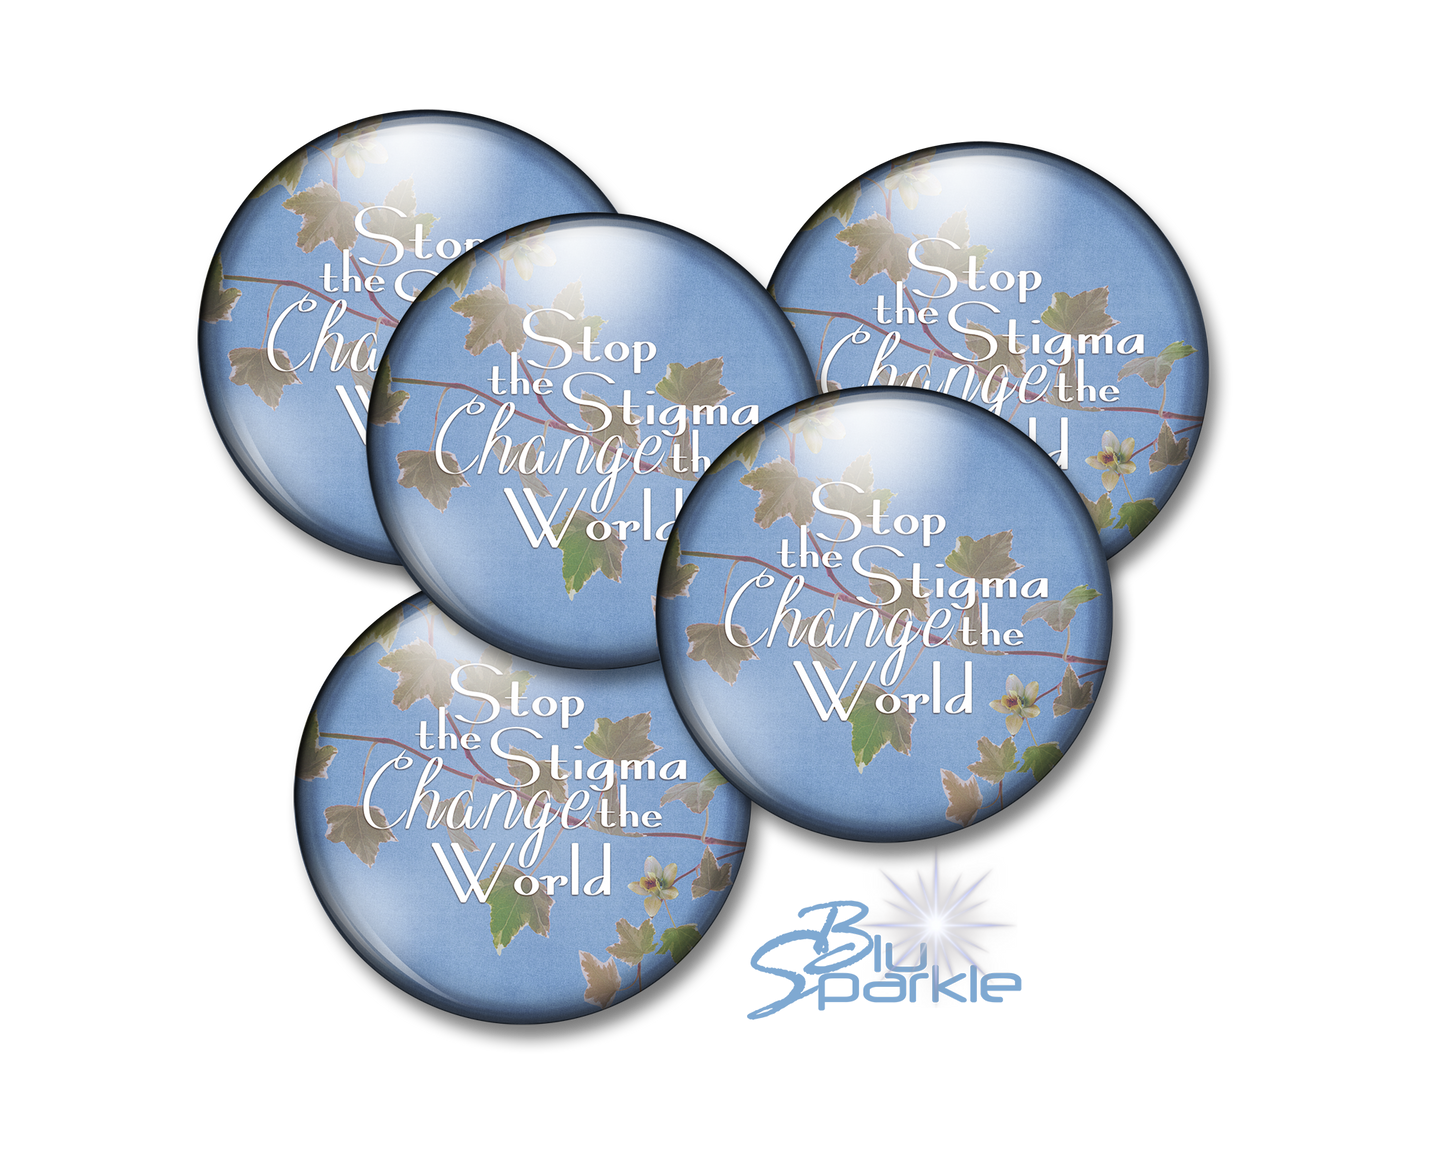 Stop the Stigma, Change the World - Pinback Buttons